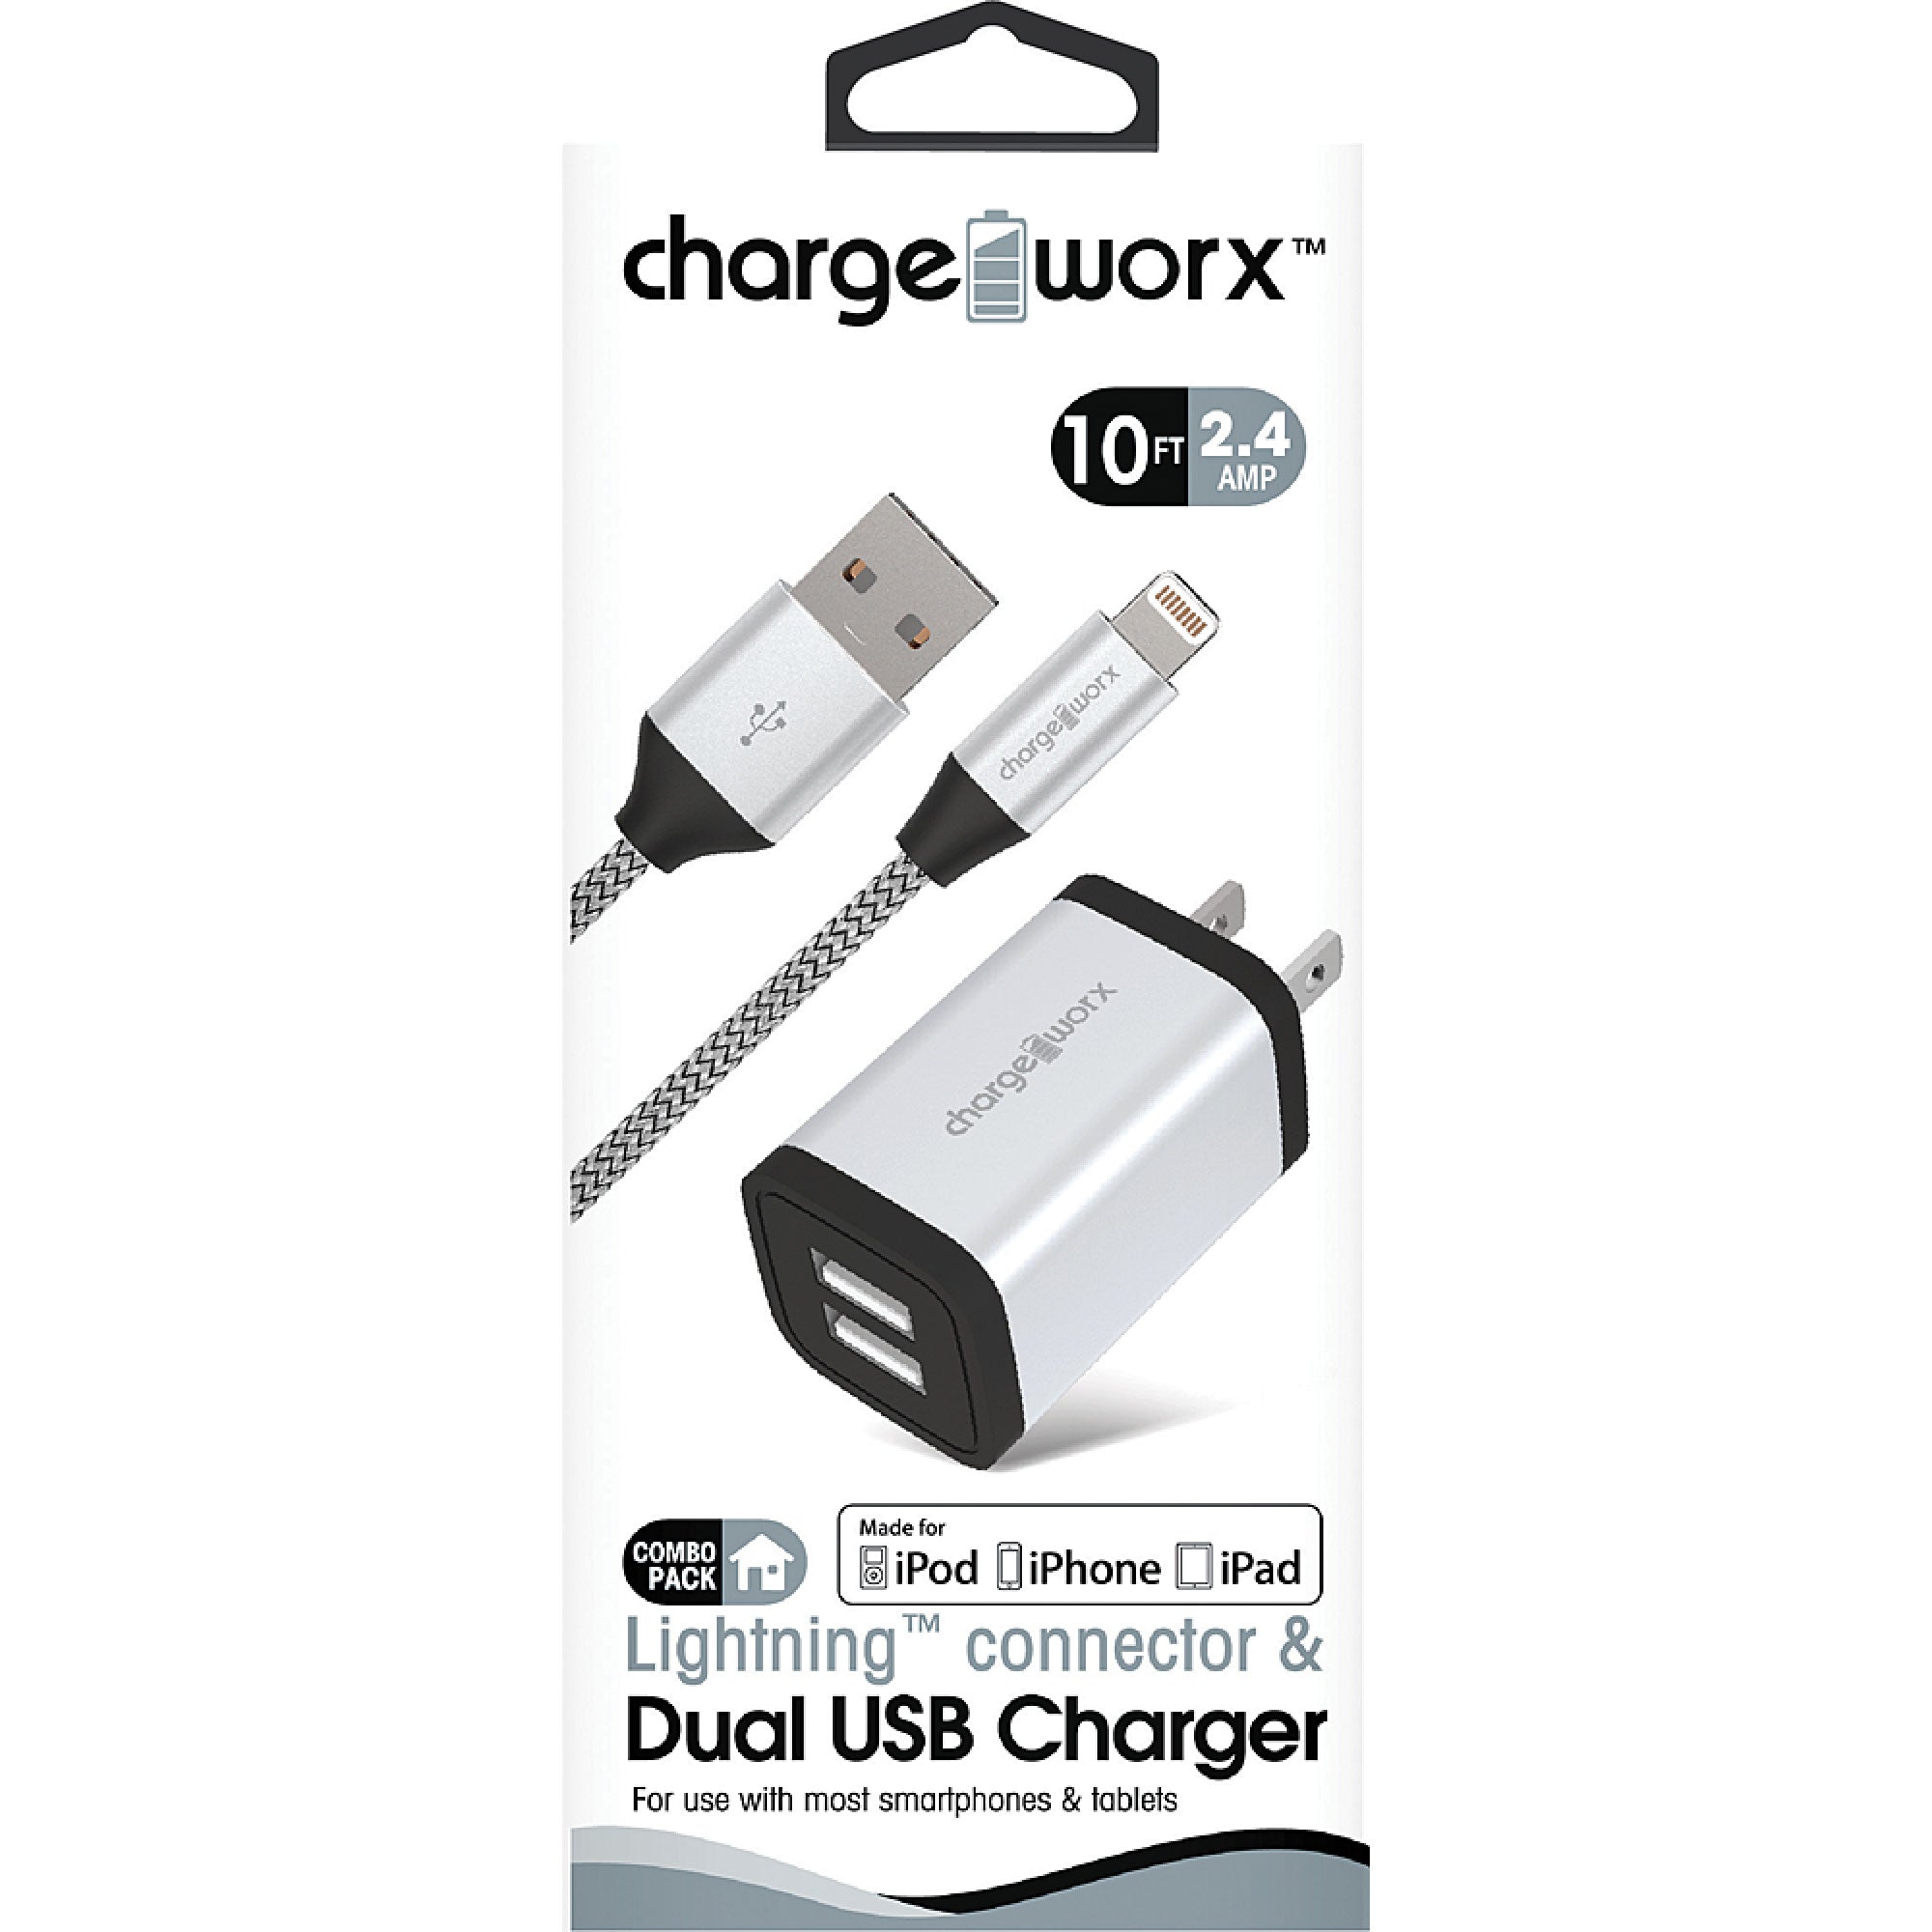 Chargeworx 2.4A Dual USB Metal Wall Charger & 10ft Lightning Cable